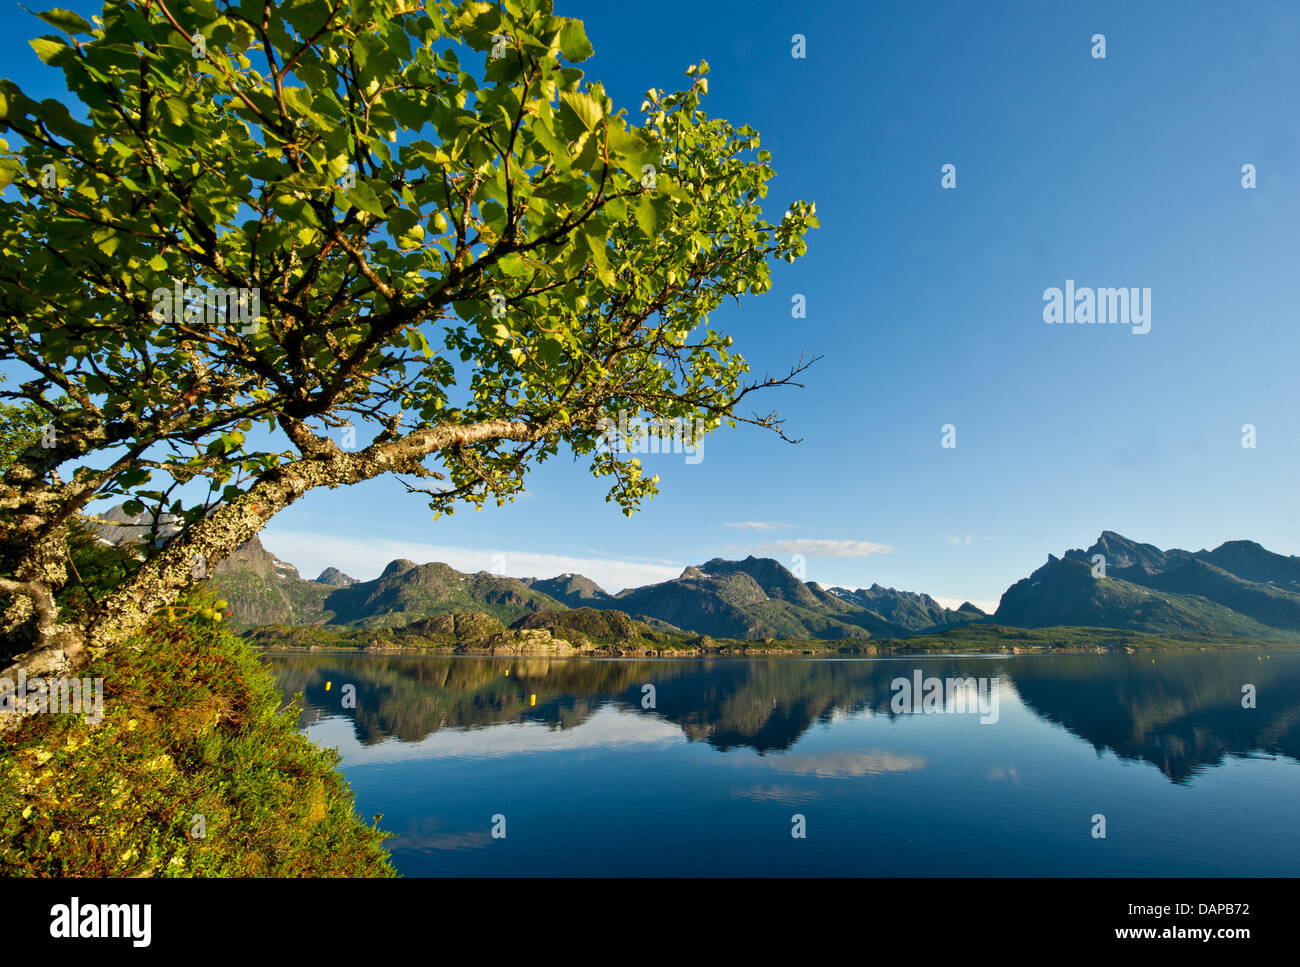 Mountains are reflected in the water on the Raftsund shores on the islands of Lofoten in Digermulen, Norway, 25 July 2011. The 190 km long island chain Lofoten features spectacular sites and mountains. Situated 100 to 200 km north of the Polar circle in the Norwegian Sea, the islands share the 67th/68th degree of latitude with central Greenland and North Alaska. About 20 per cent o Stock Photo